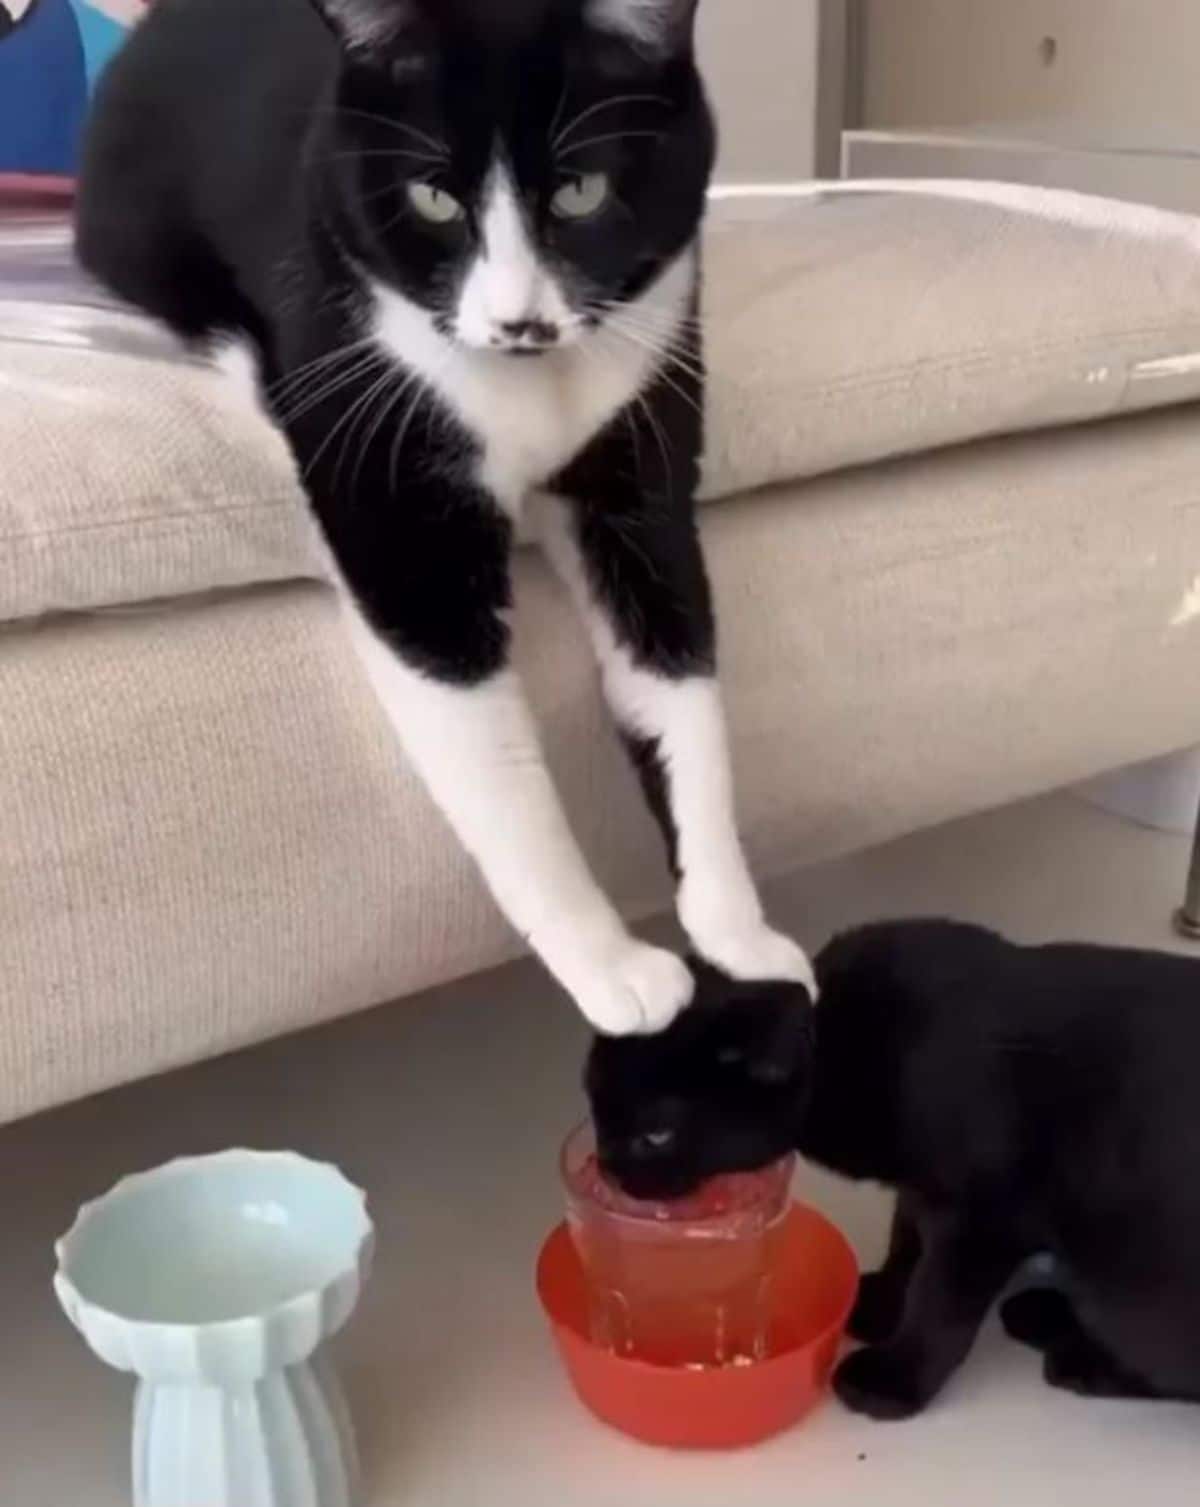 black kitten drinking out of a glass in a red bowl on the floor with a black and white cat sitting higher up on a white sofa pushing the kitten's head into the water